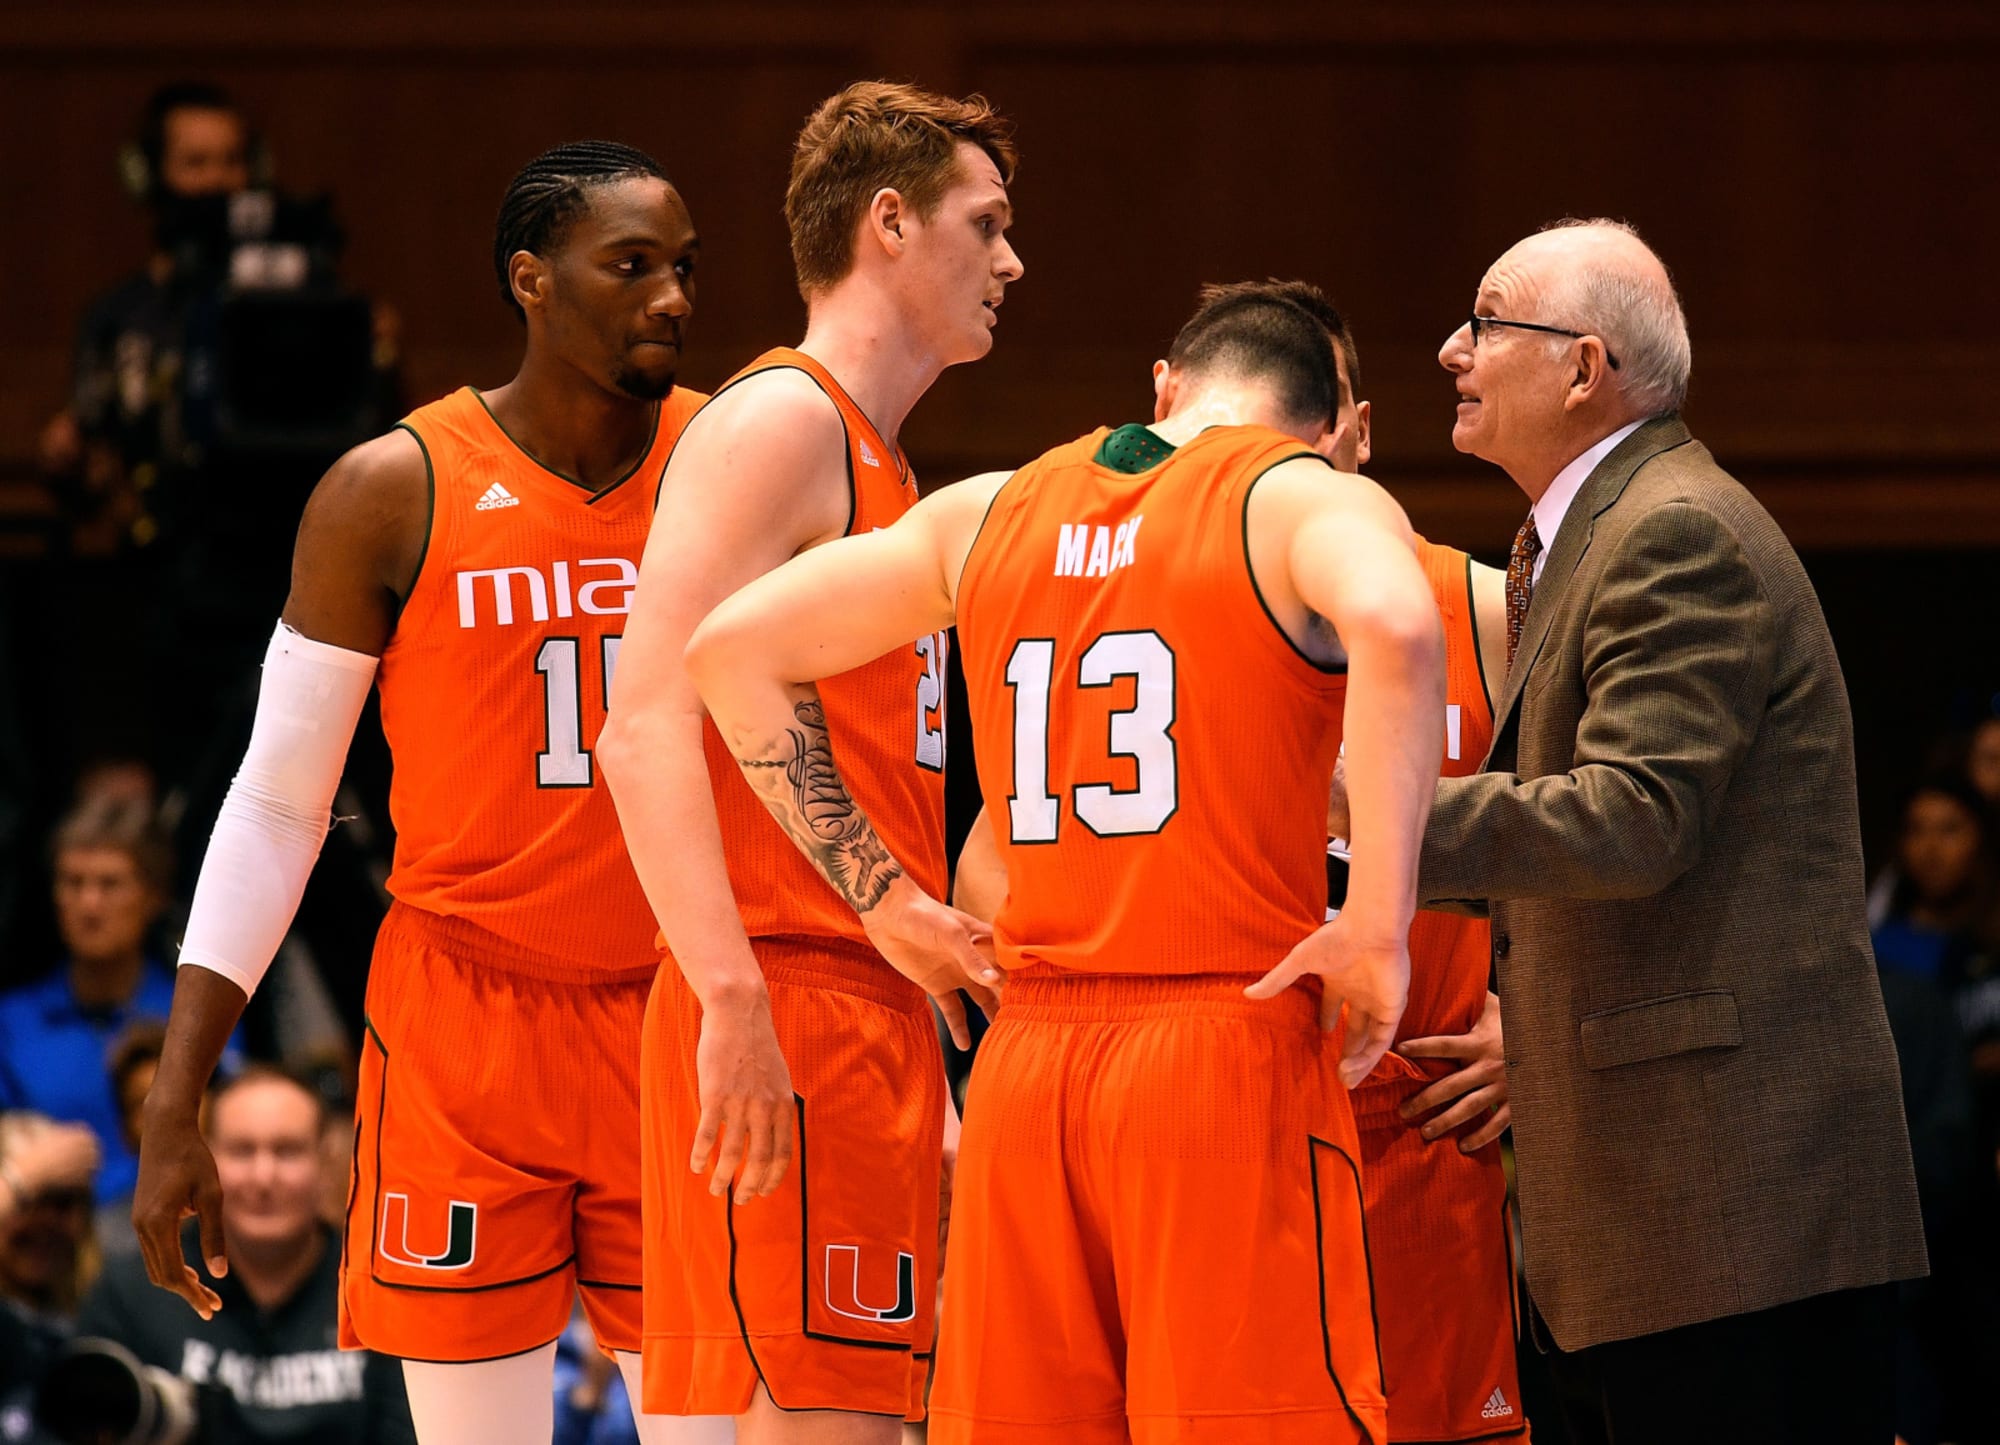 Miami basketball performed well vs NCAA 1 seeds UVA and UNC